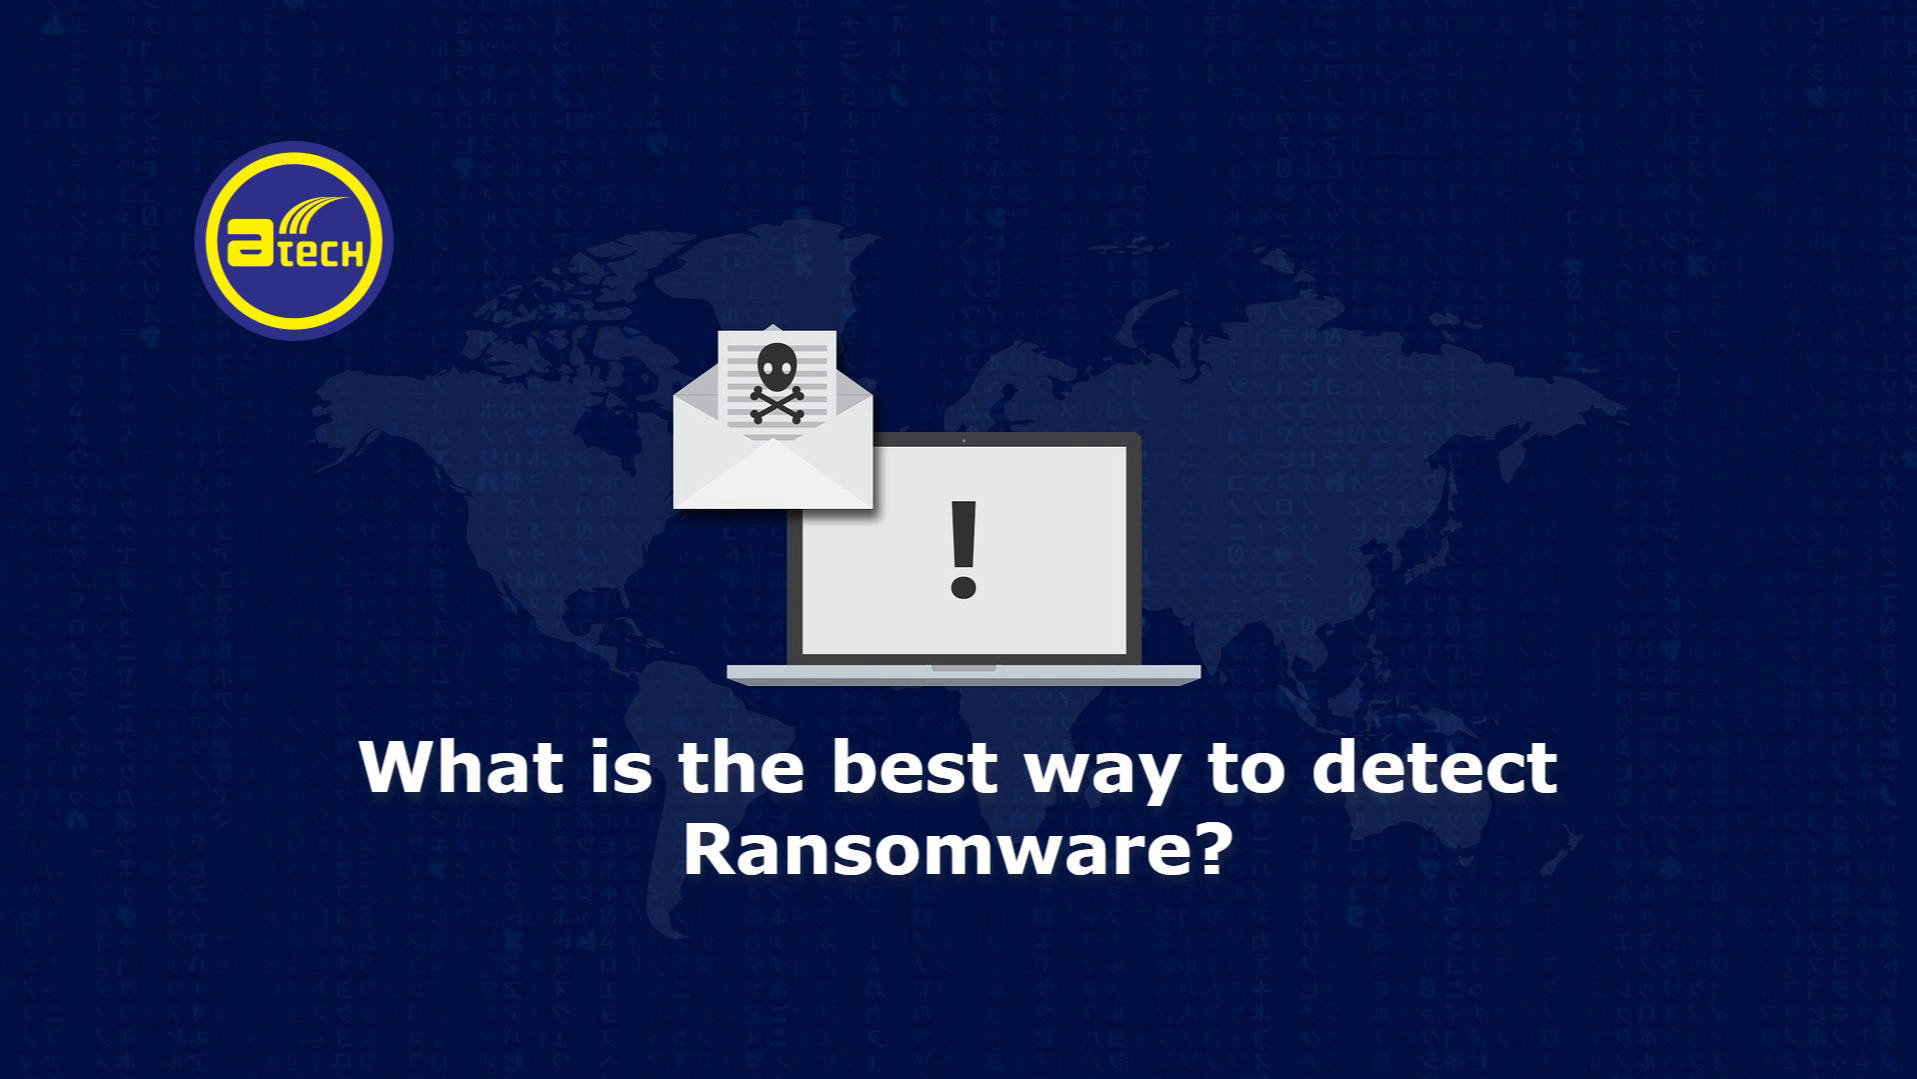 Detect Ransomware